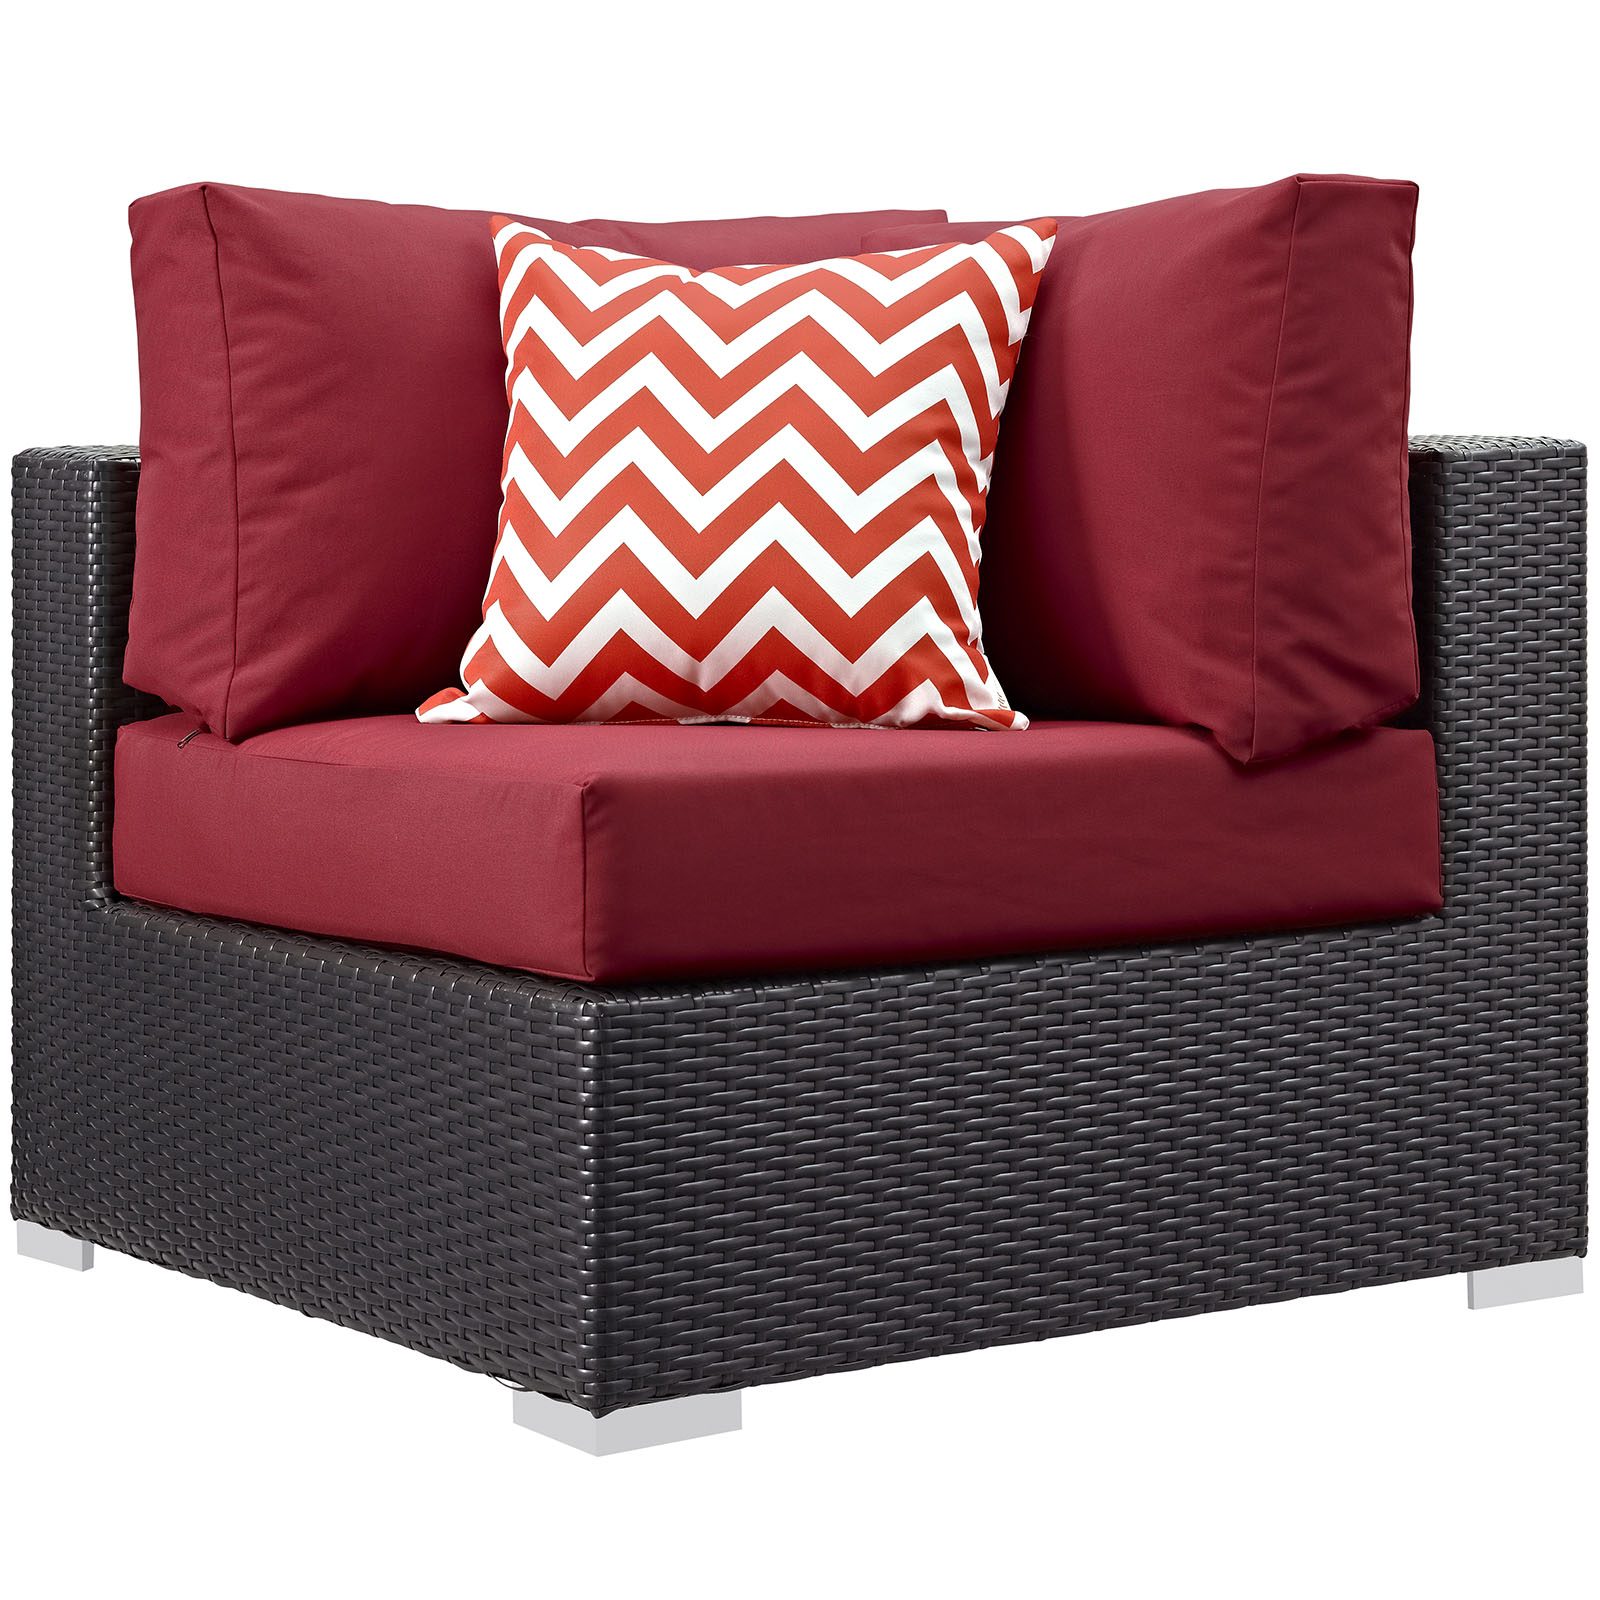 Modway Convene 6 Piece Outdoor Patio Sectional Set in Espresso Red - image 3 of 5